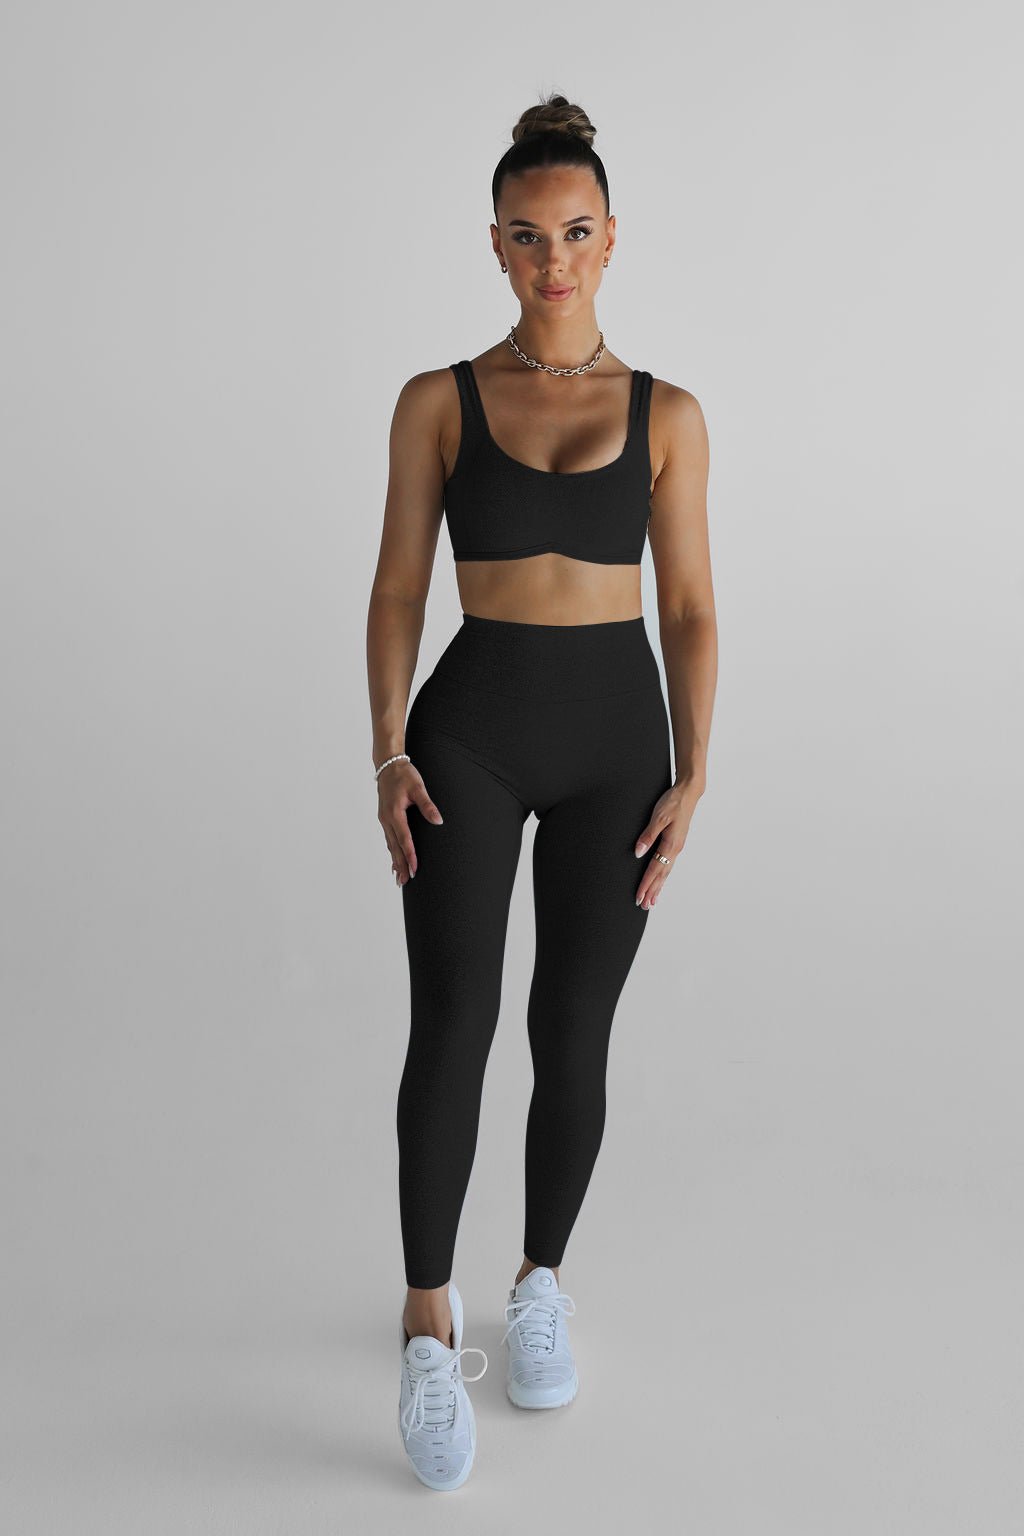 ZZAL High-Waisted Leggings, Seamless Tight Waist Holes with High Waist in  Cut-Outs, Hip Stretch Sports Trousers (Size: M, Colour: Black) : :  Fashion